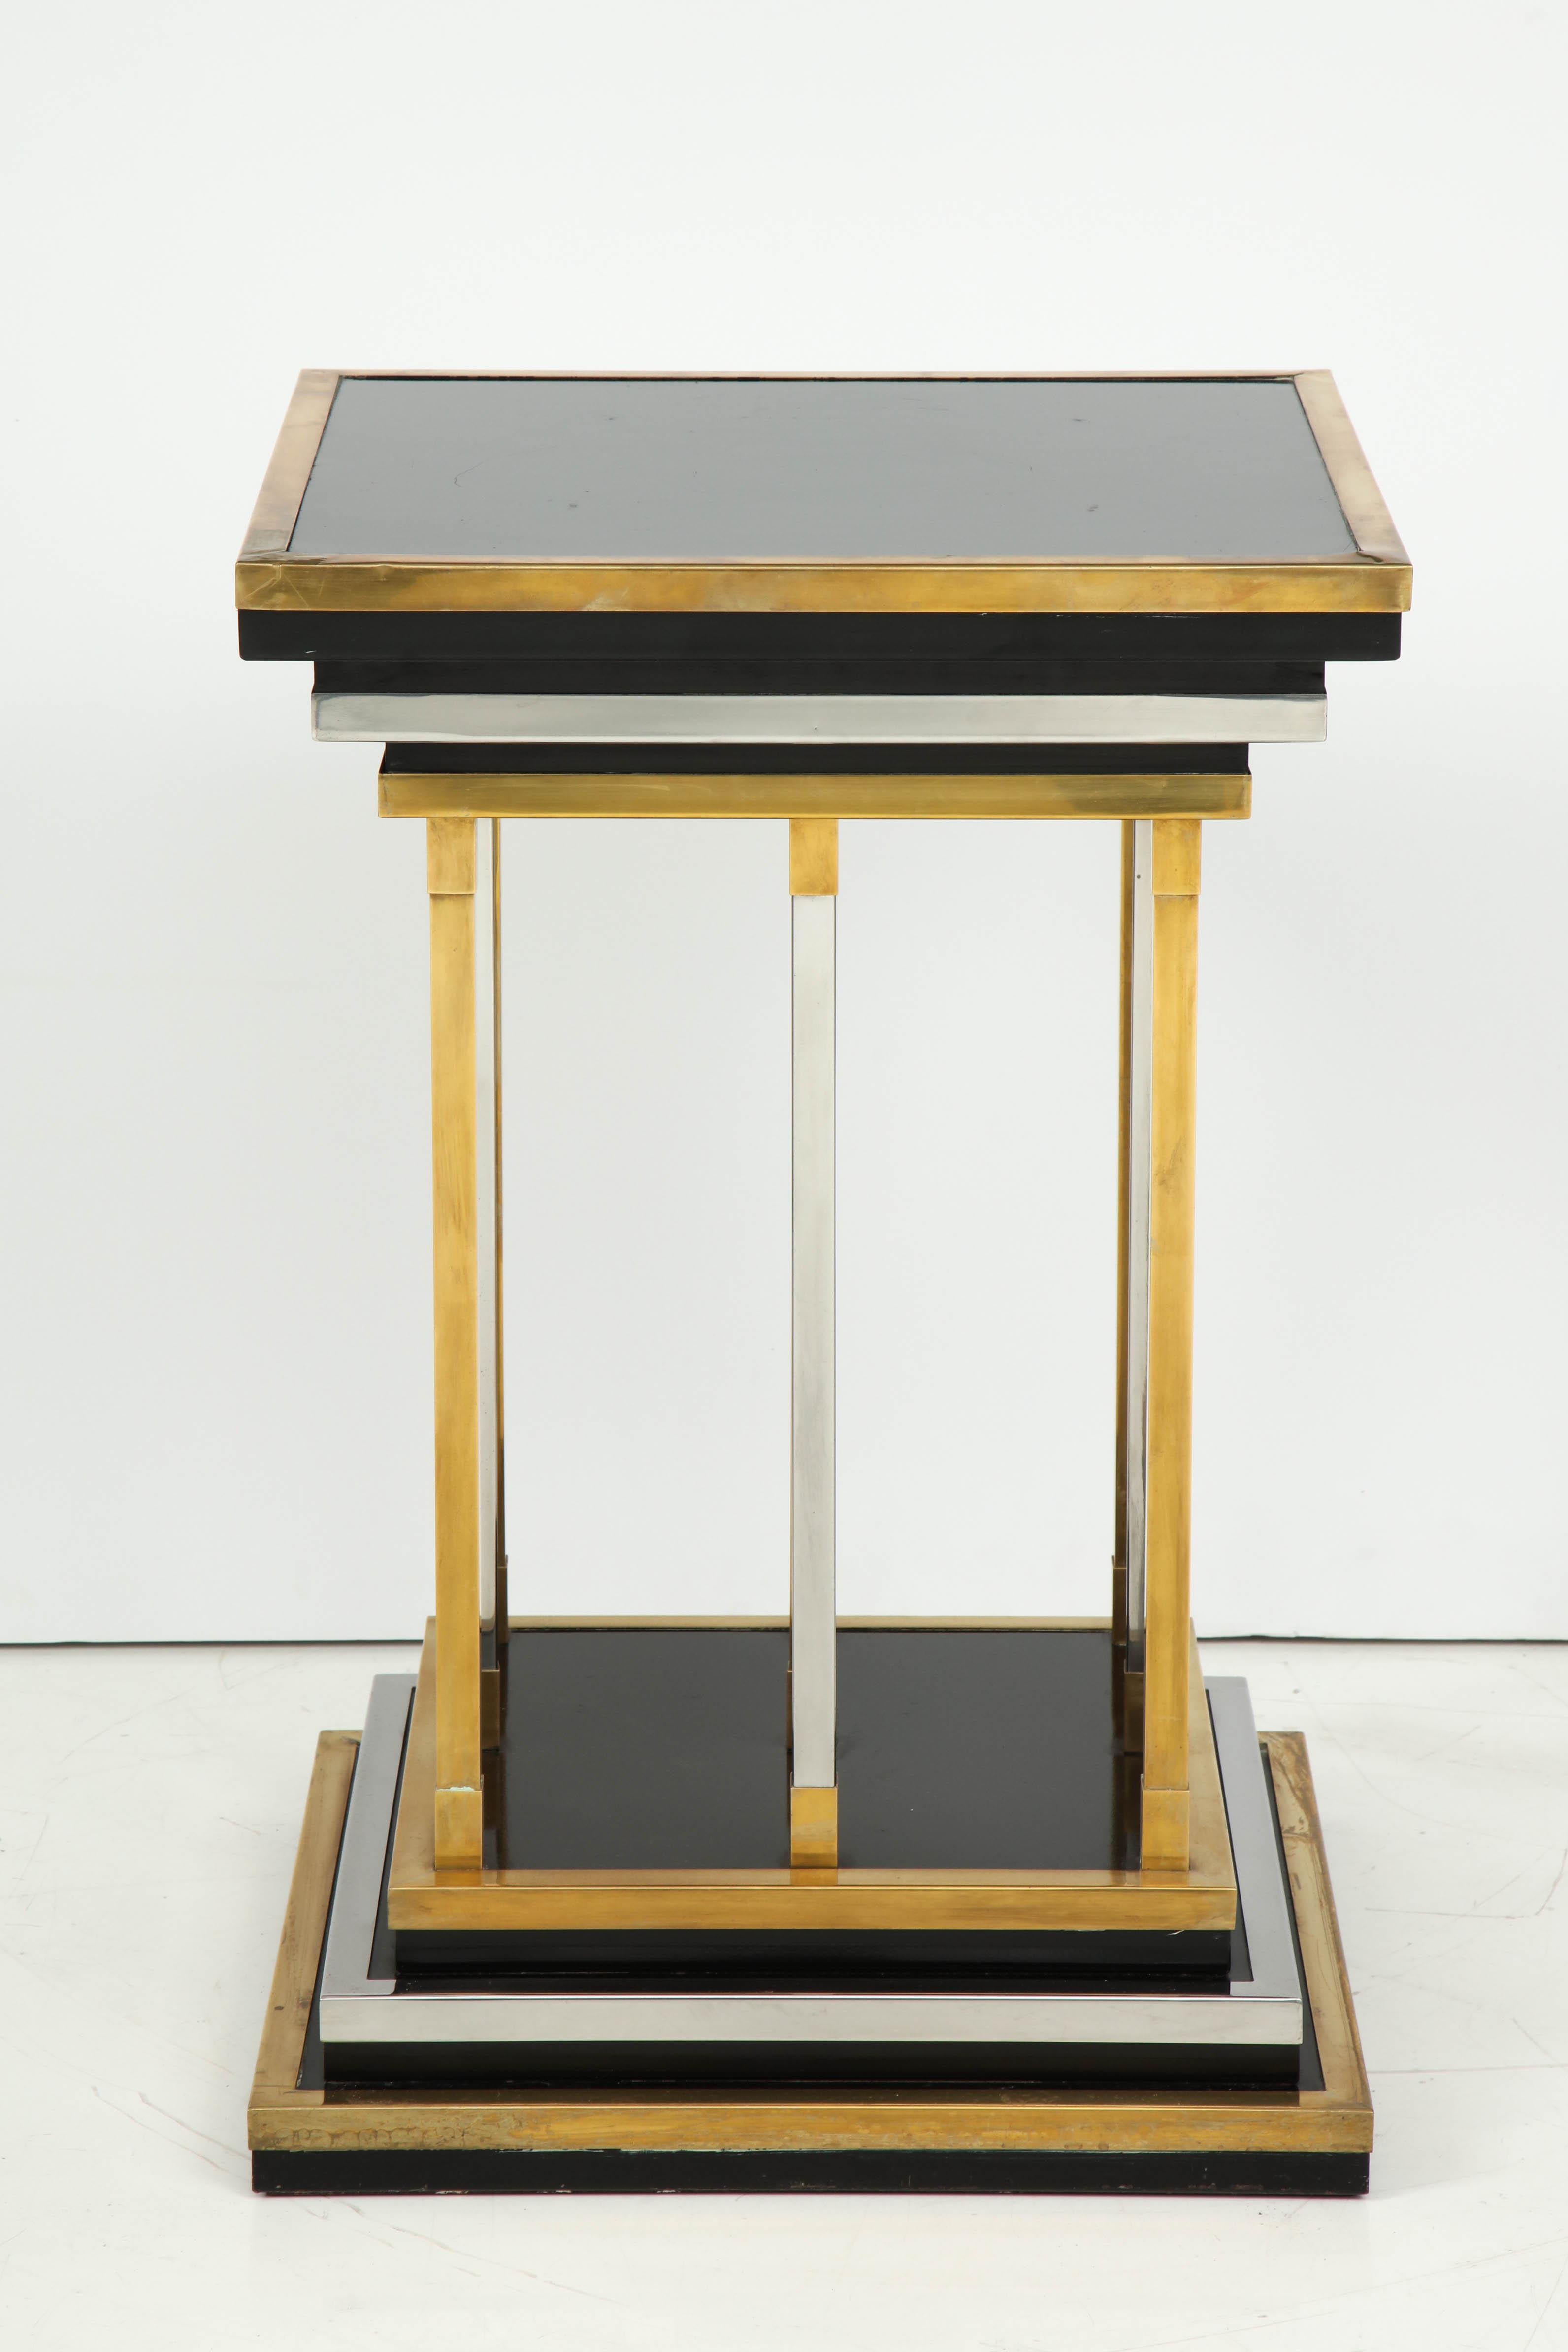 20th century polished brass and black lacquer side table, the top and base stepped and graduated, supported by nine brass bars.